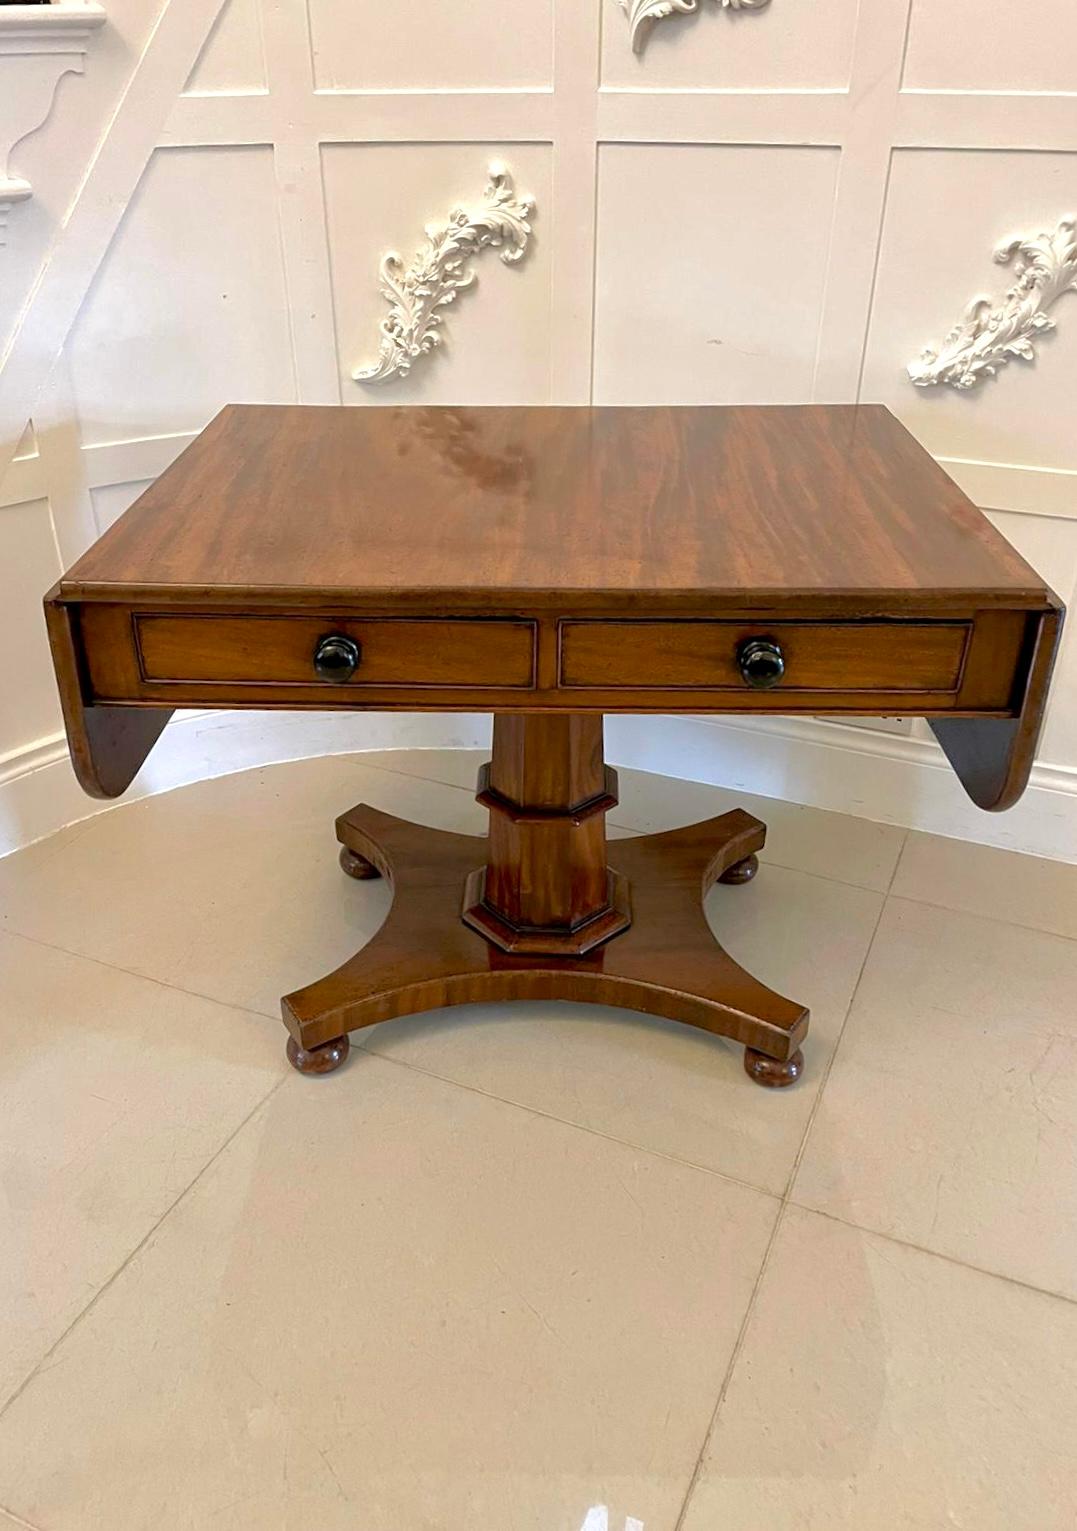 Antique Regency quality figured mahogany freestanding sofa table having a quality figured mahogany top with two drop leaves above two frieze drawers and two dummy drawers with original turned knobs supported by a super hexagonal shaped pedestal